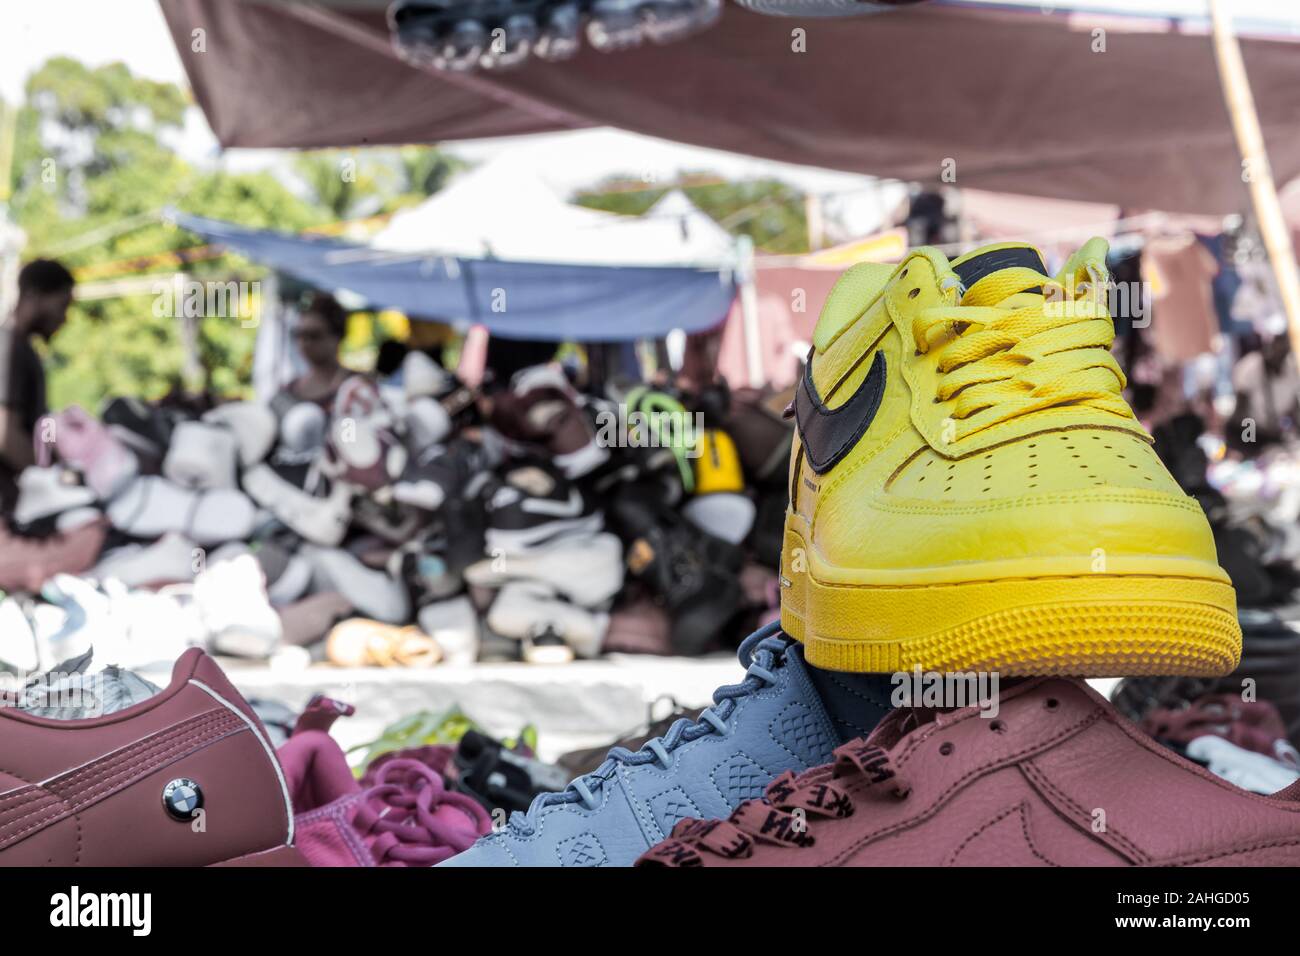 dramatic image of yellow tennis shoes 